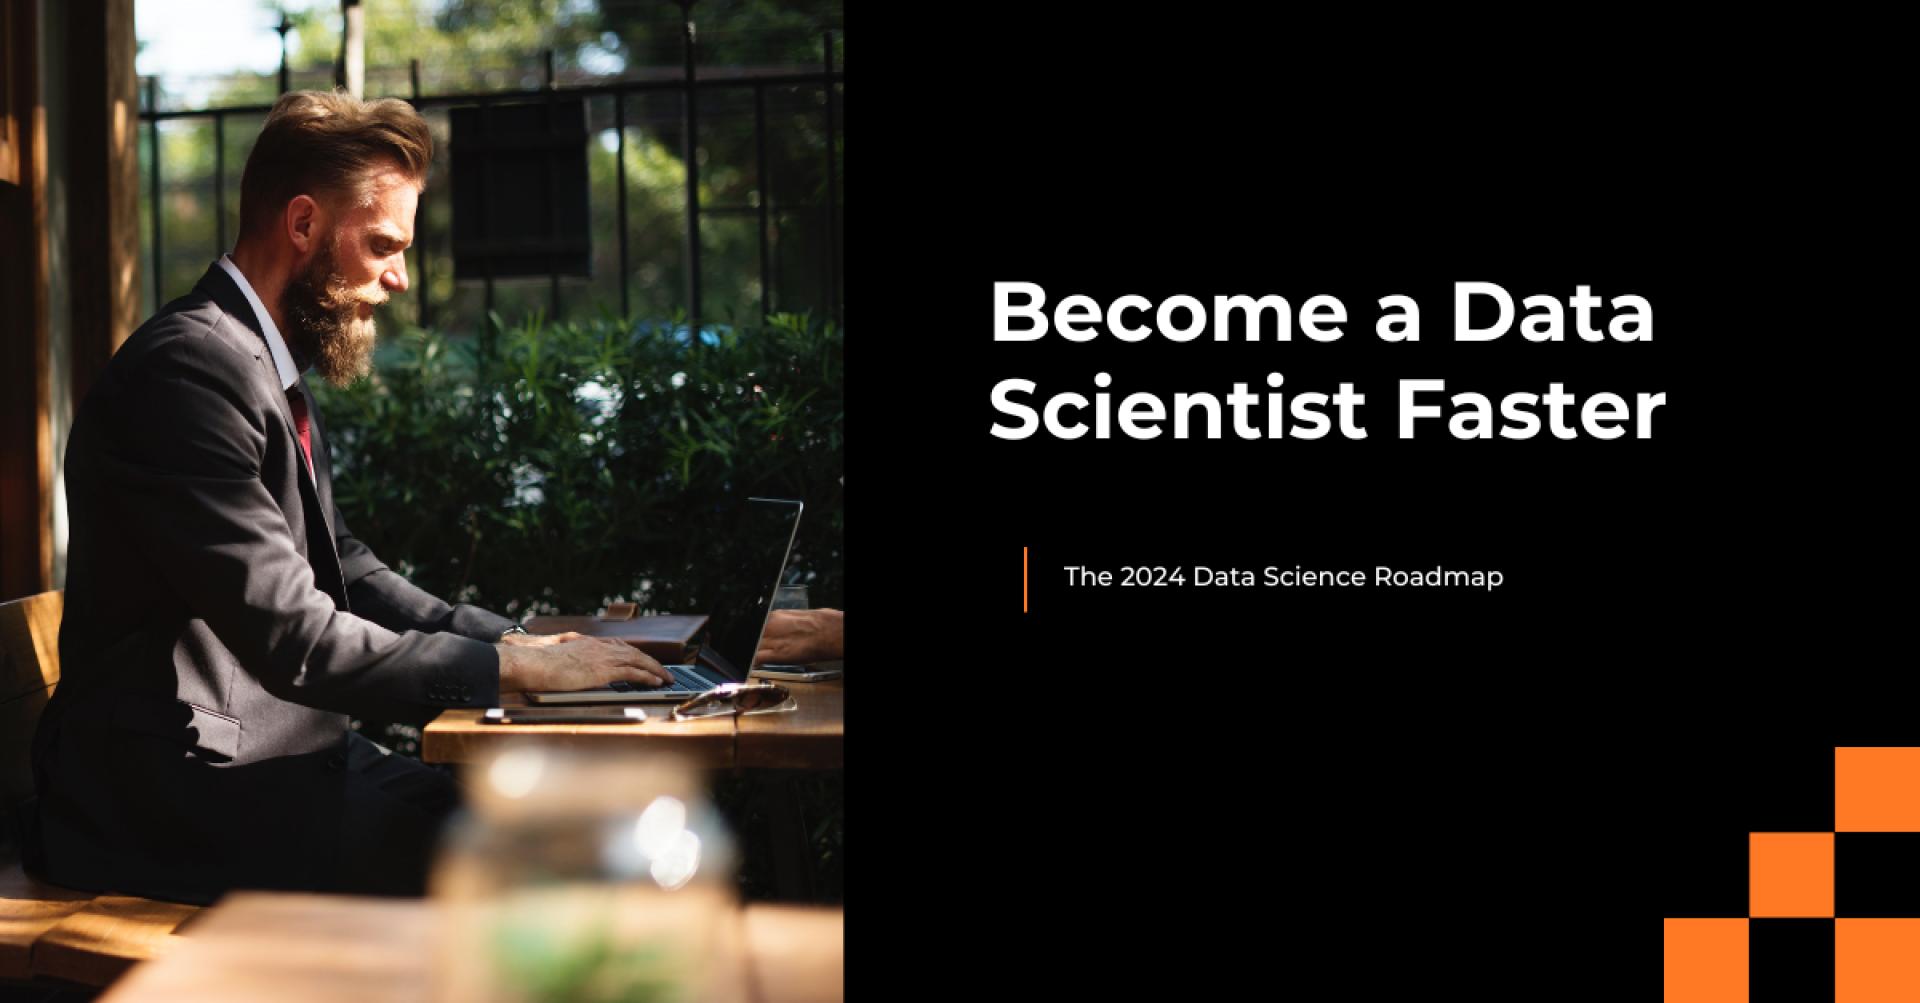 Become a Data Scientist Faster: The 2024 Roadmap